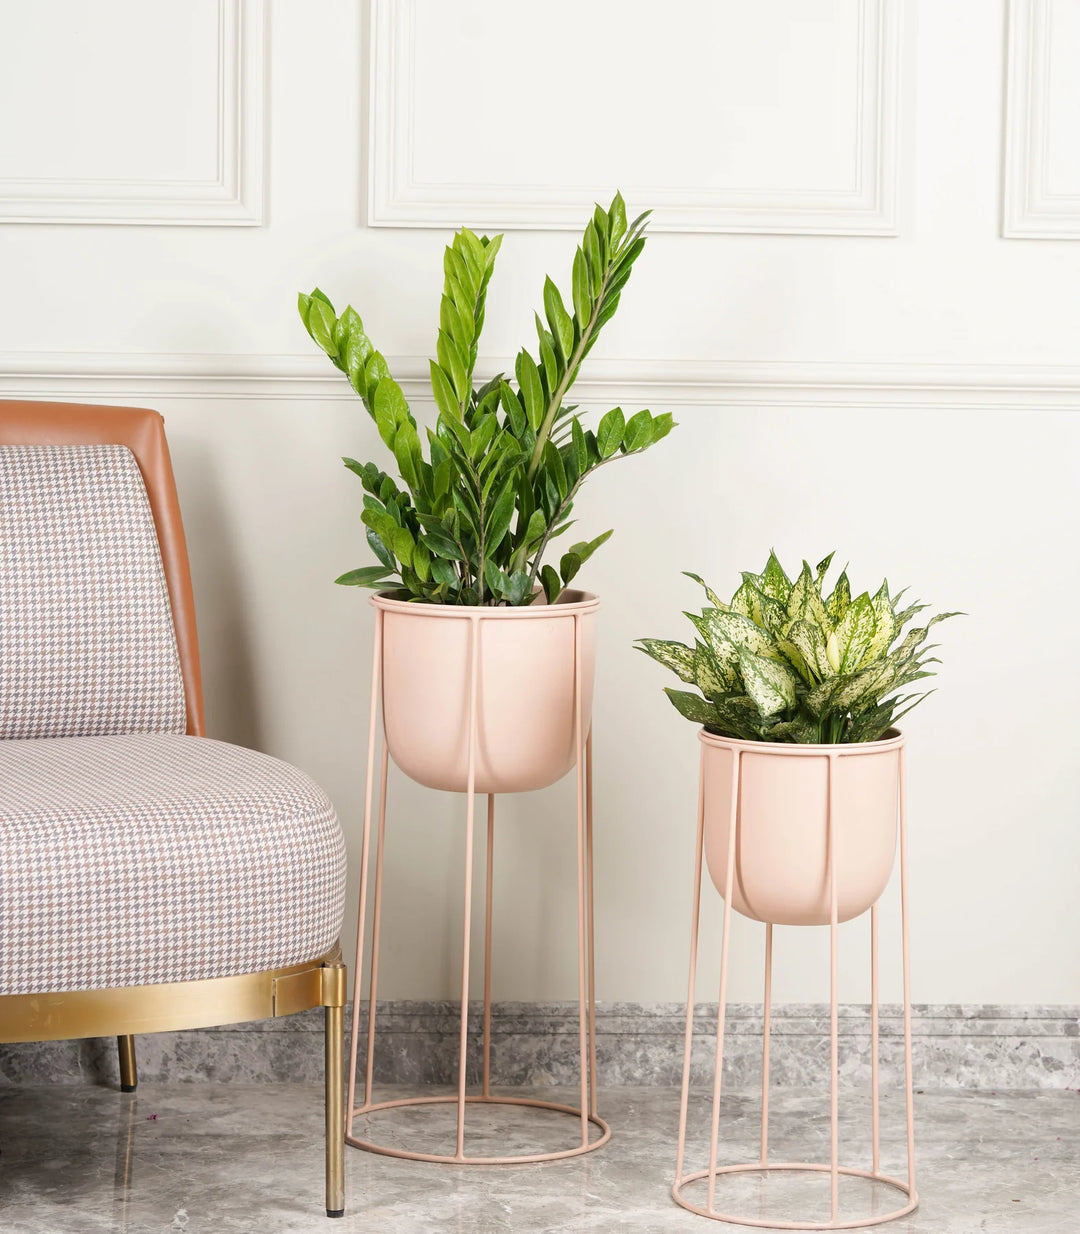 Metal Floor Planters with Stand Set of 2 | Millennial Metal Floor Planters with Stand in Pastel Colors Set of 2